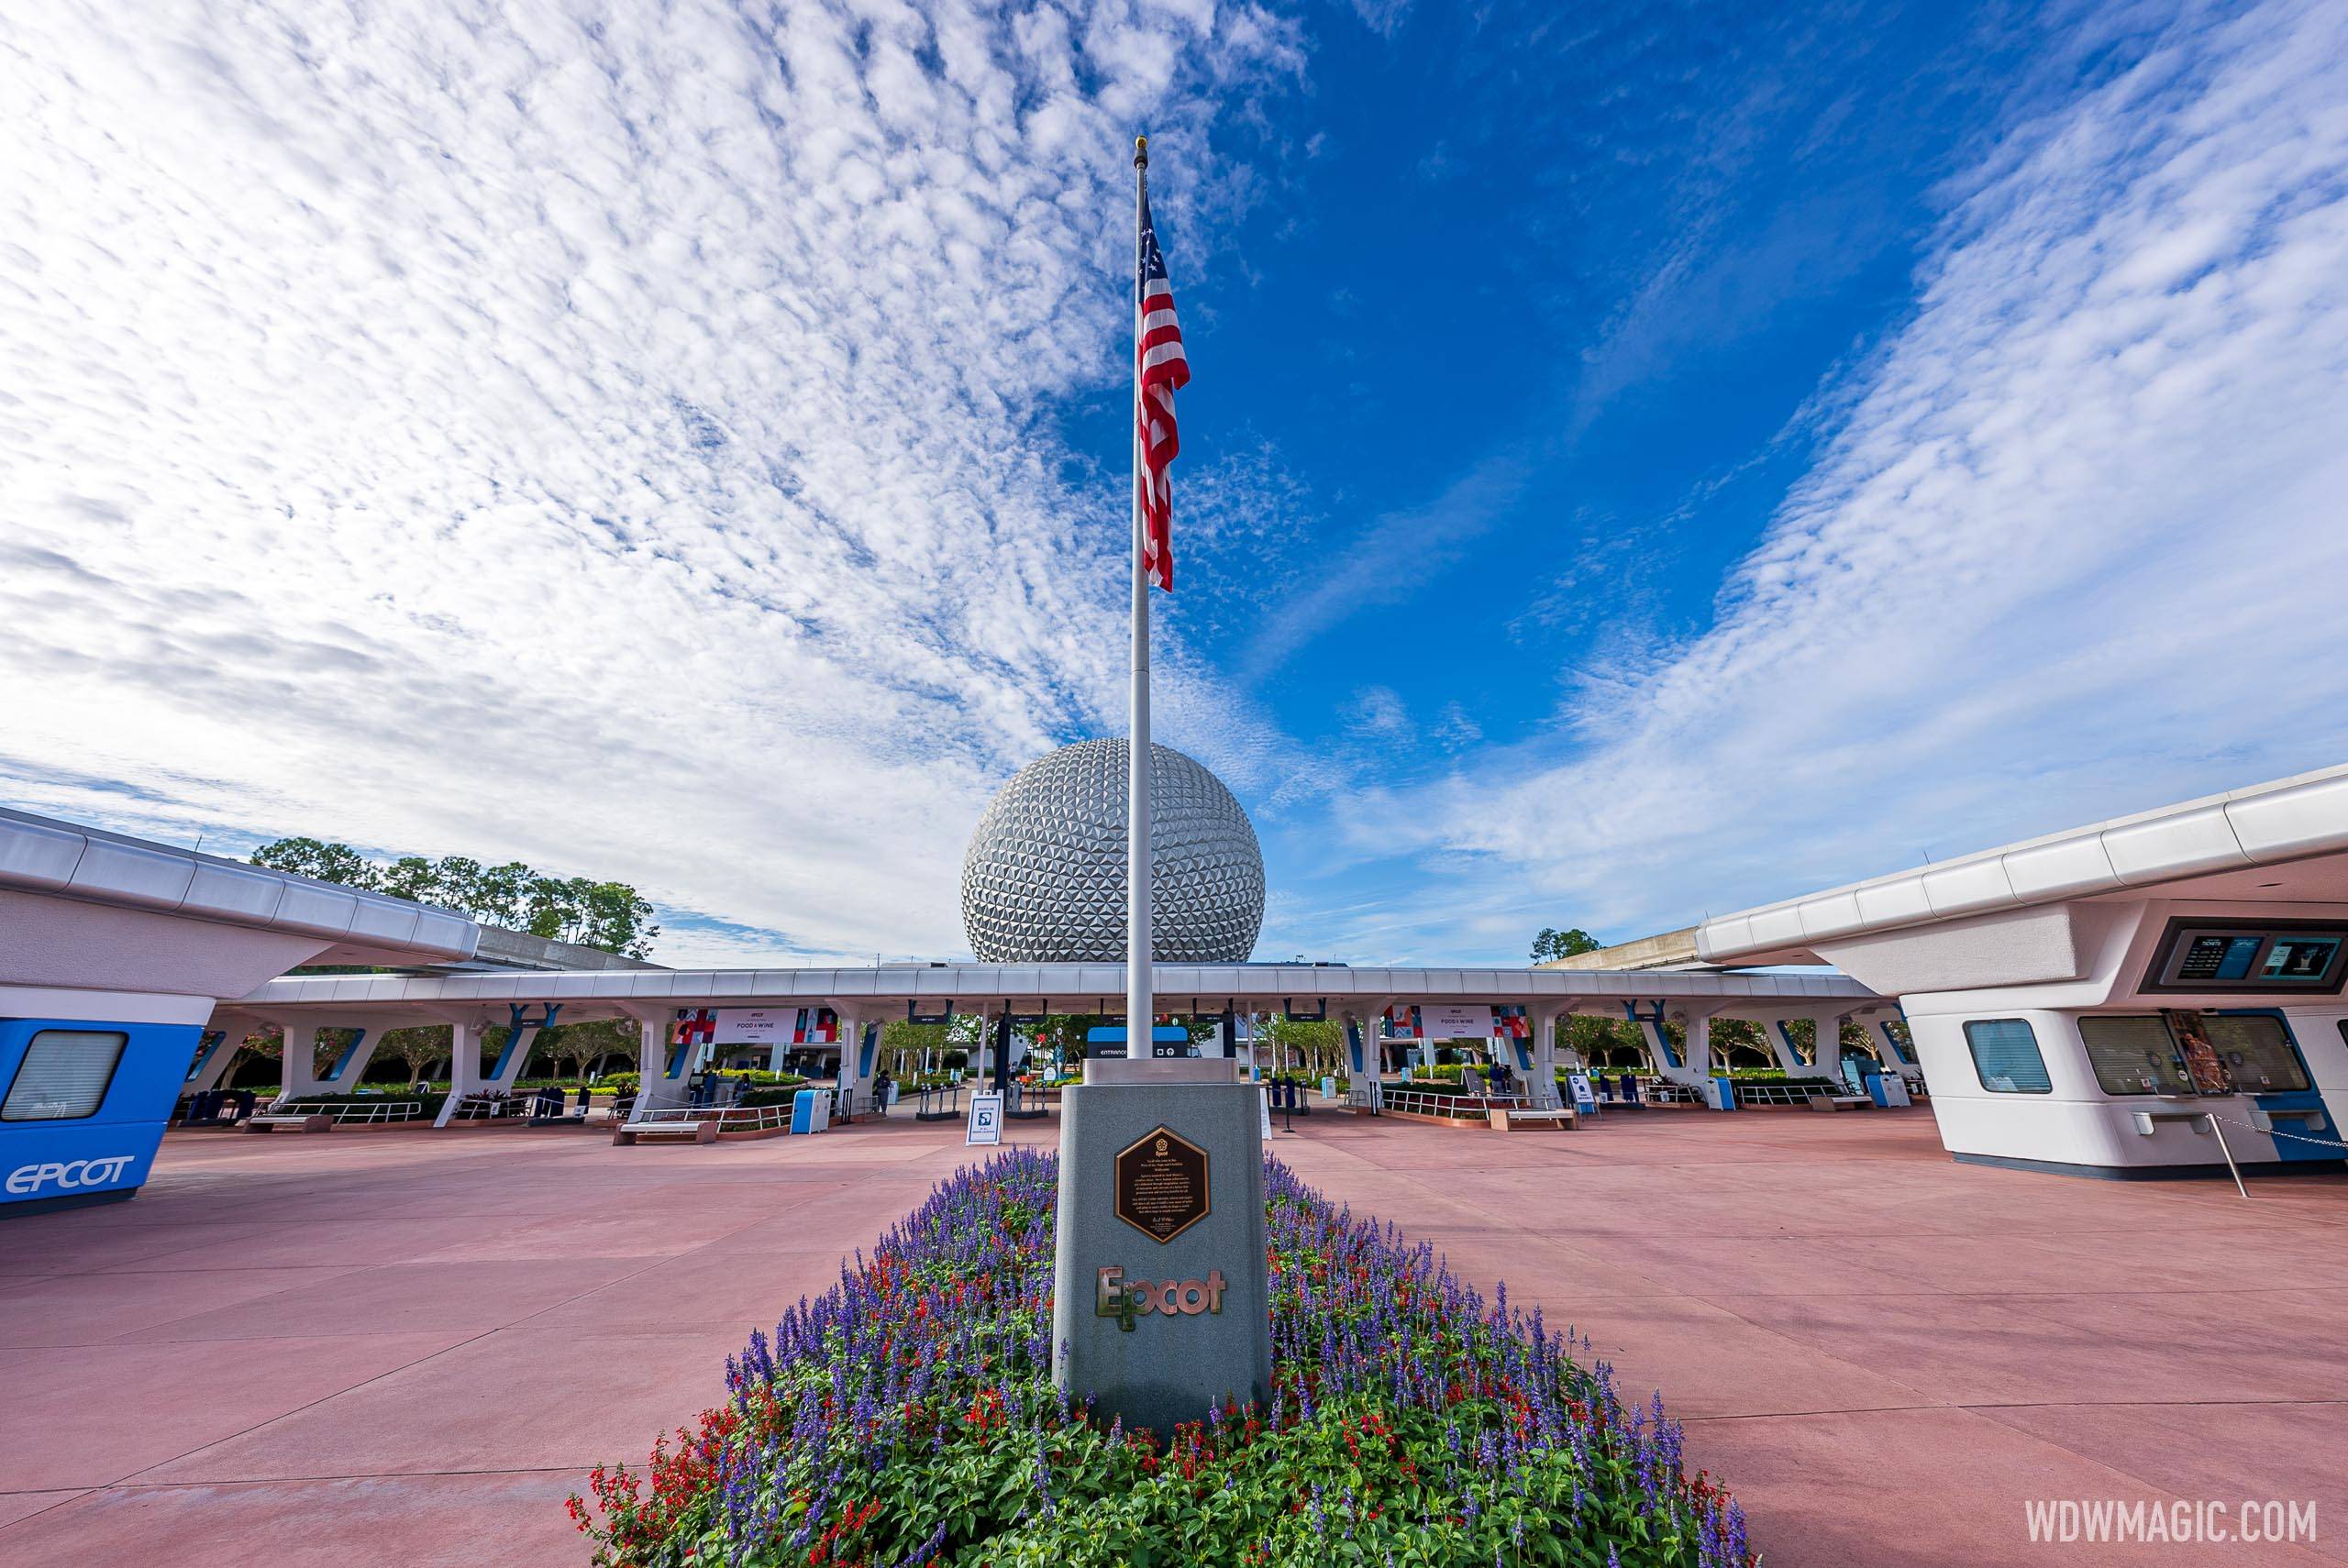 Many guests will no longer need a Park Pass reservation